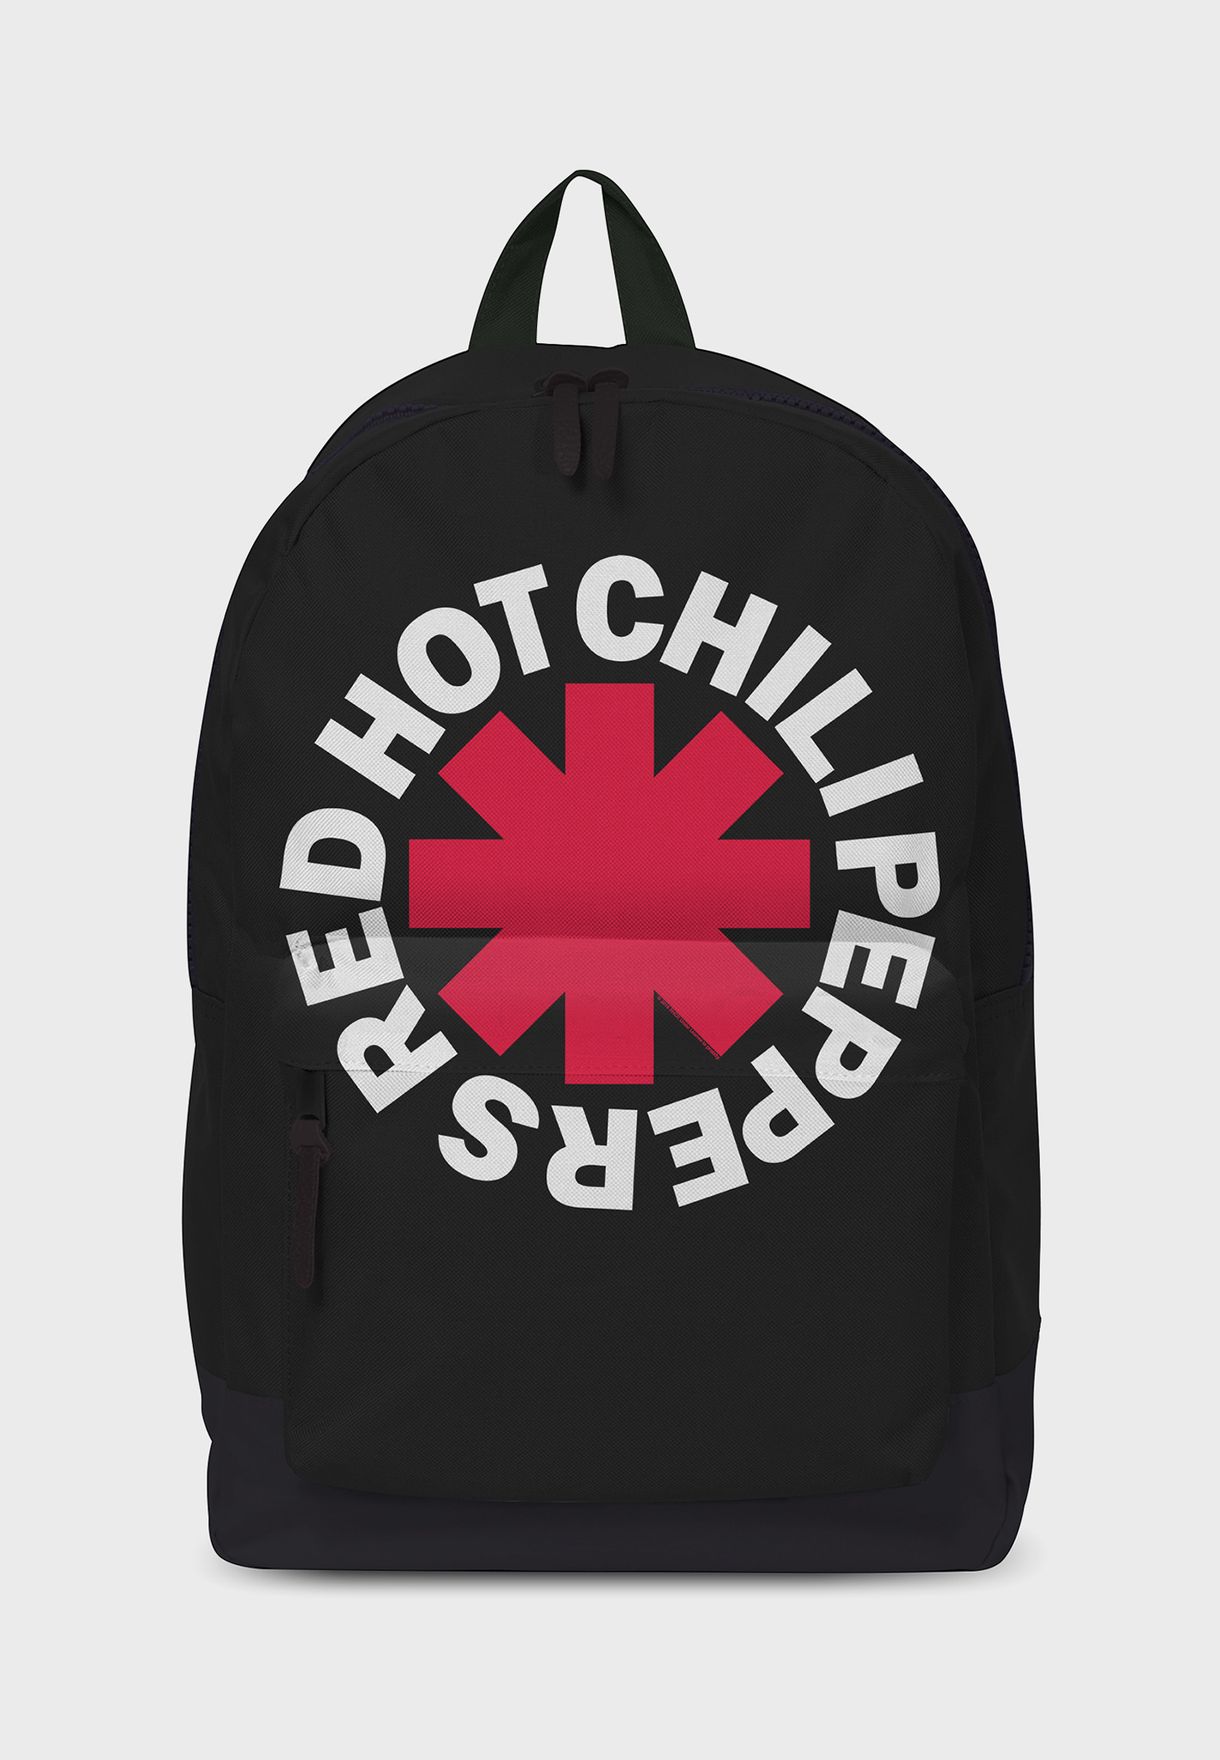 Asterix Red Hot Chili Peppers Backpack